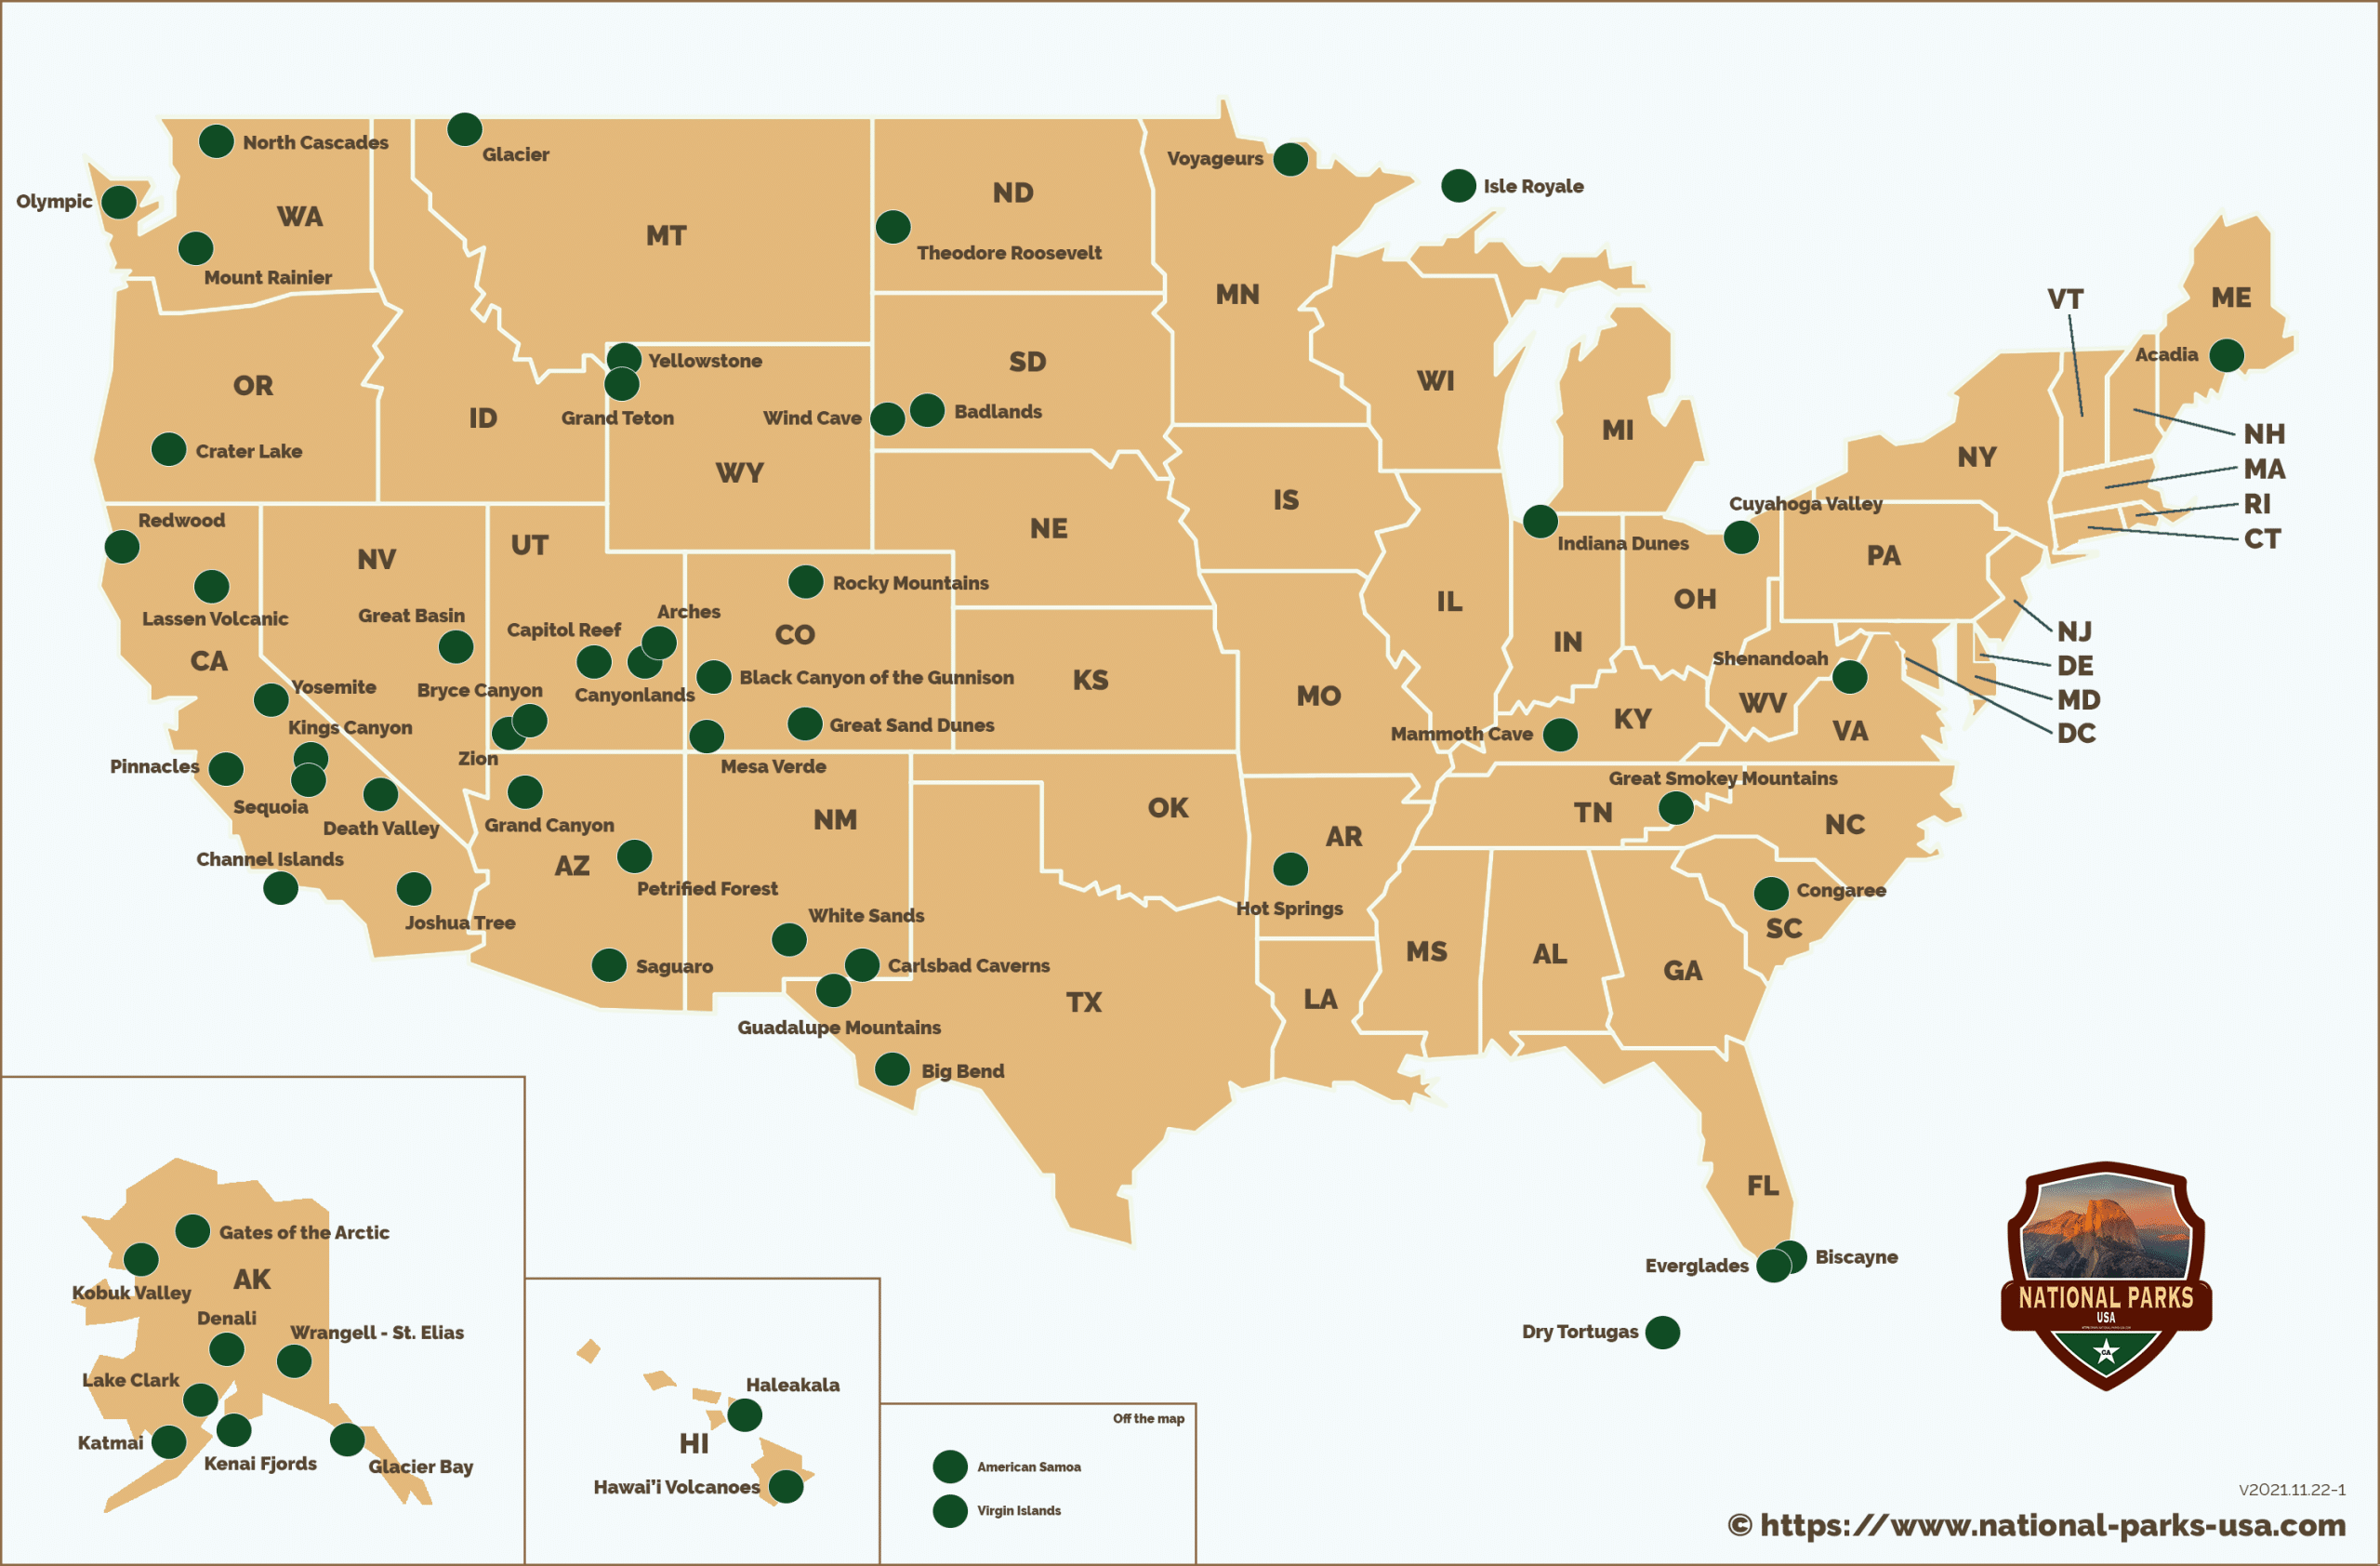 Map of National Parks and States in the USA